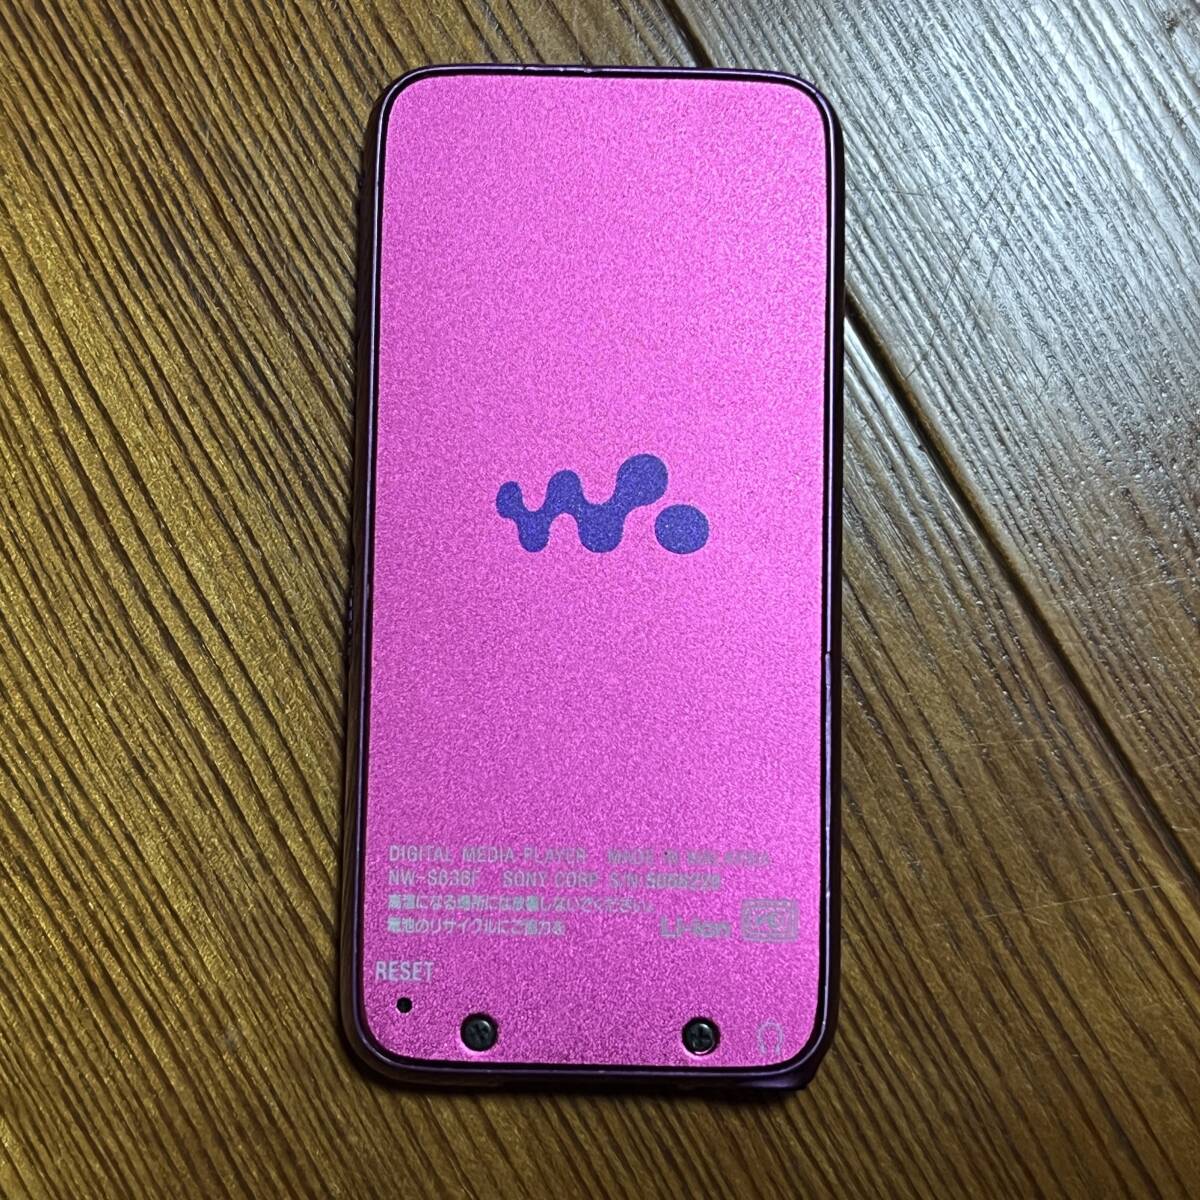 SONY NW-S636F ウォークマン ピンク レトロ_画像6